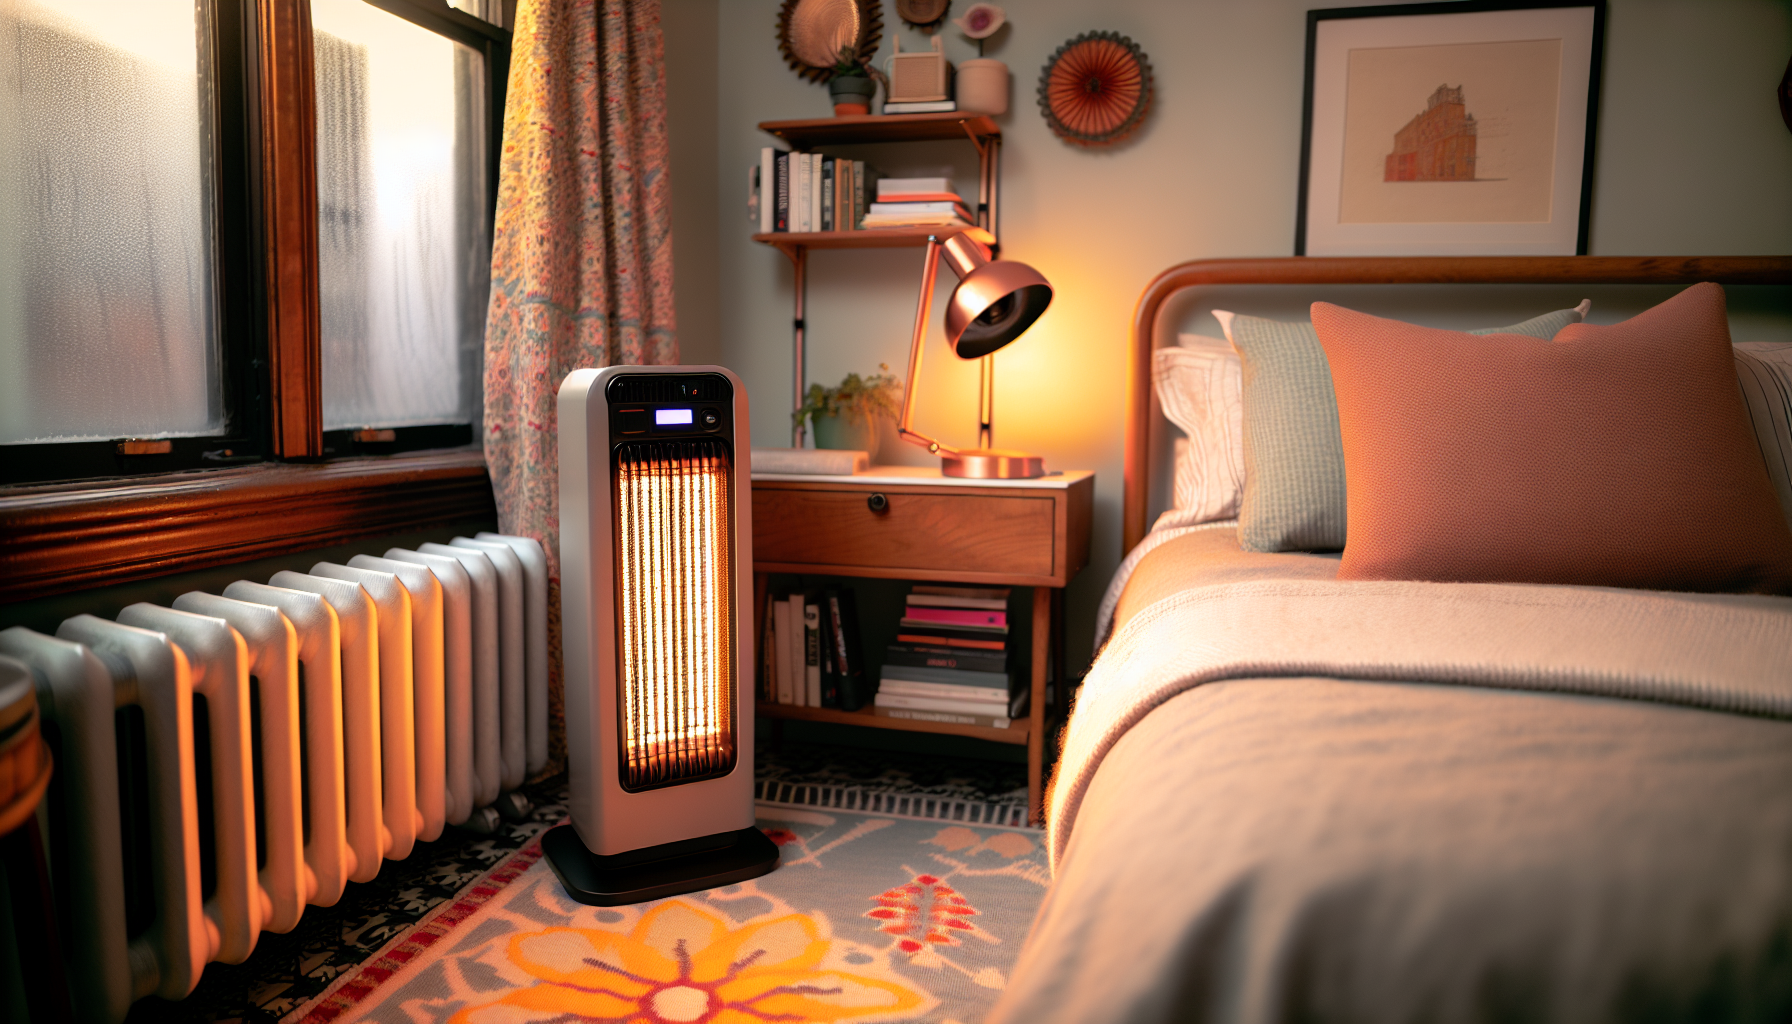 Electric heater in a small bedroom